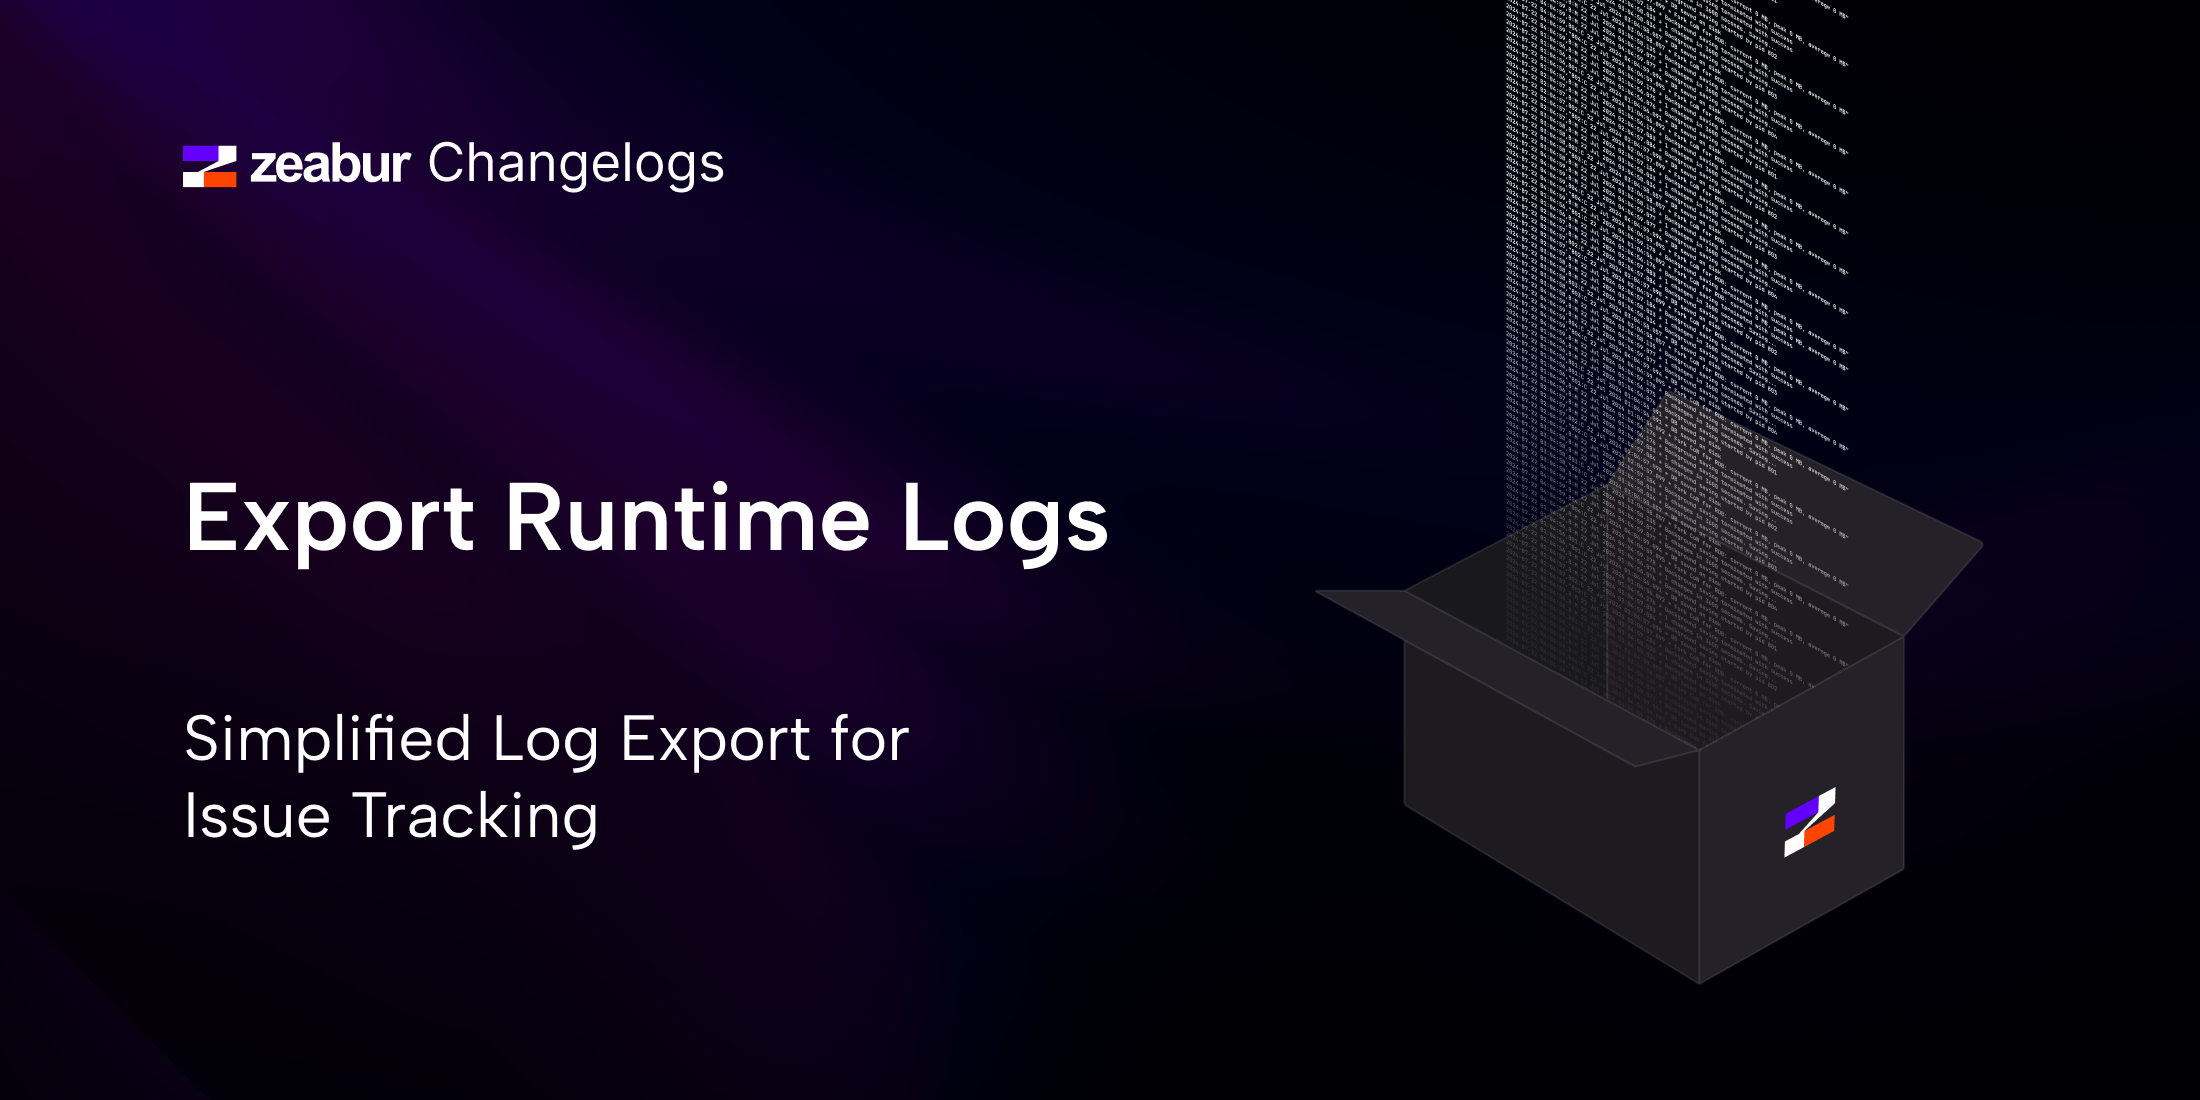 Export Runtime Logs